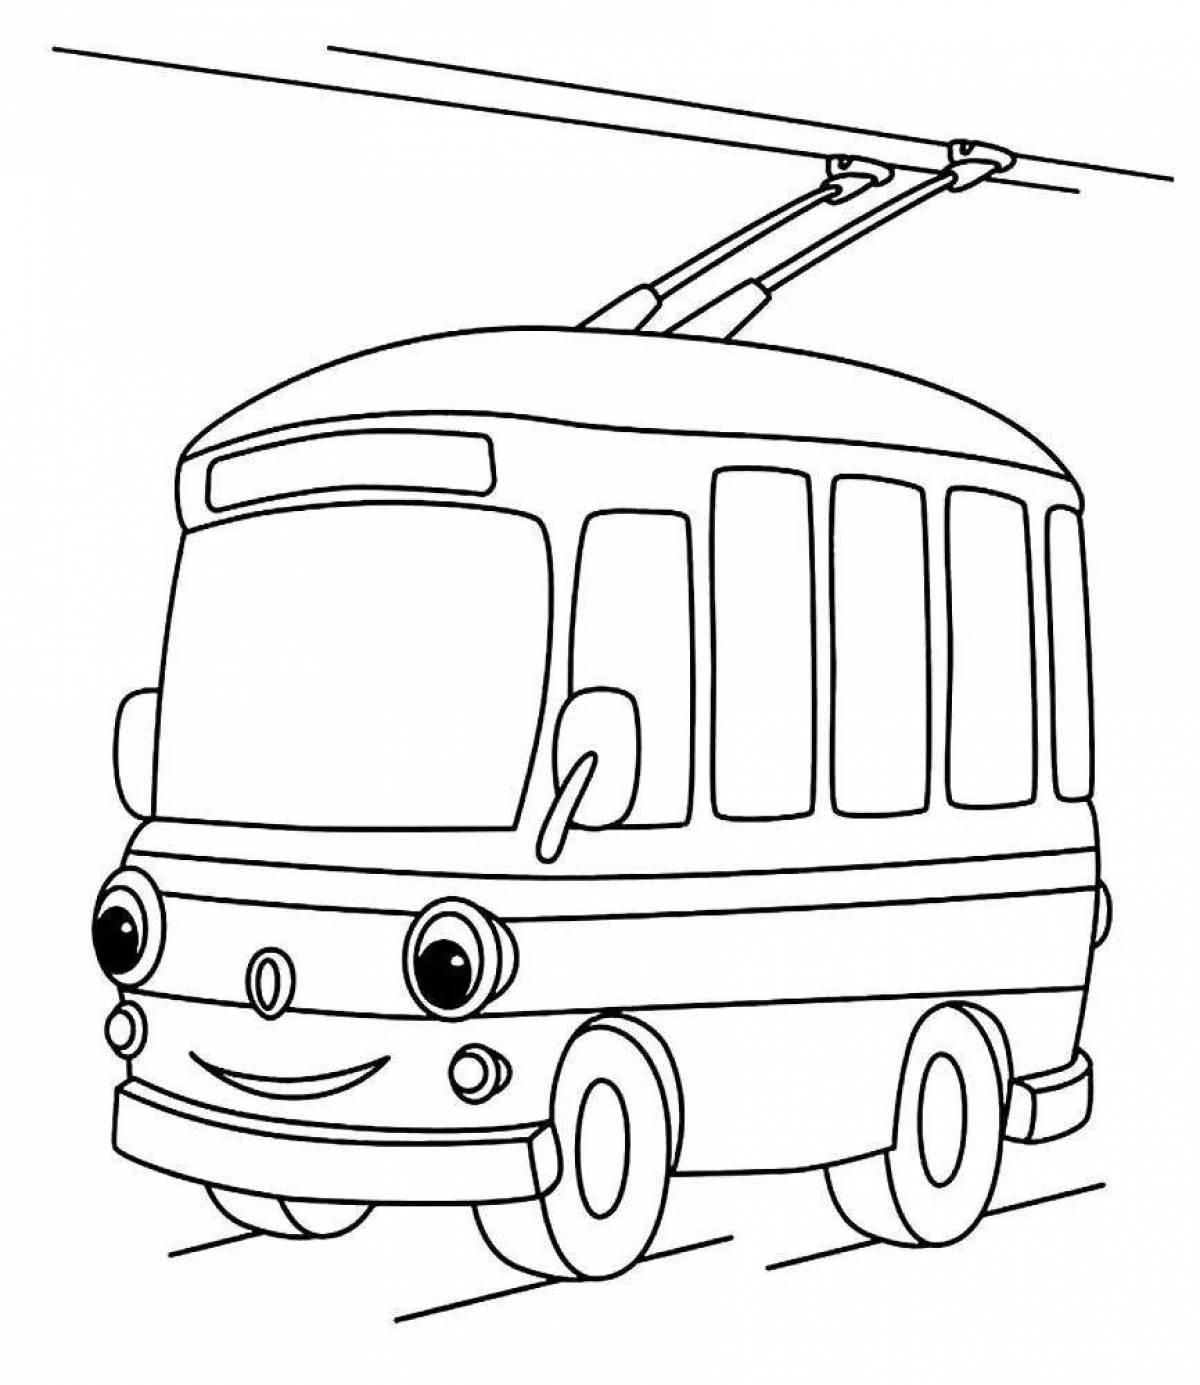 Exquisite vehicle coloring page